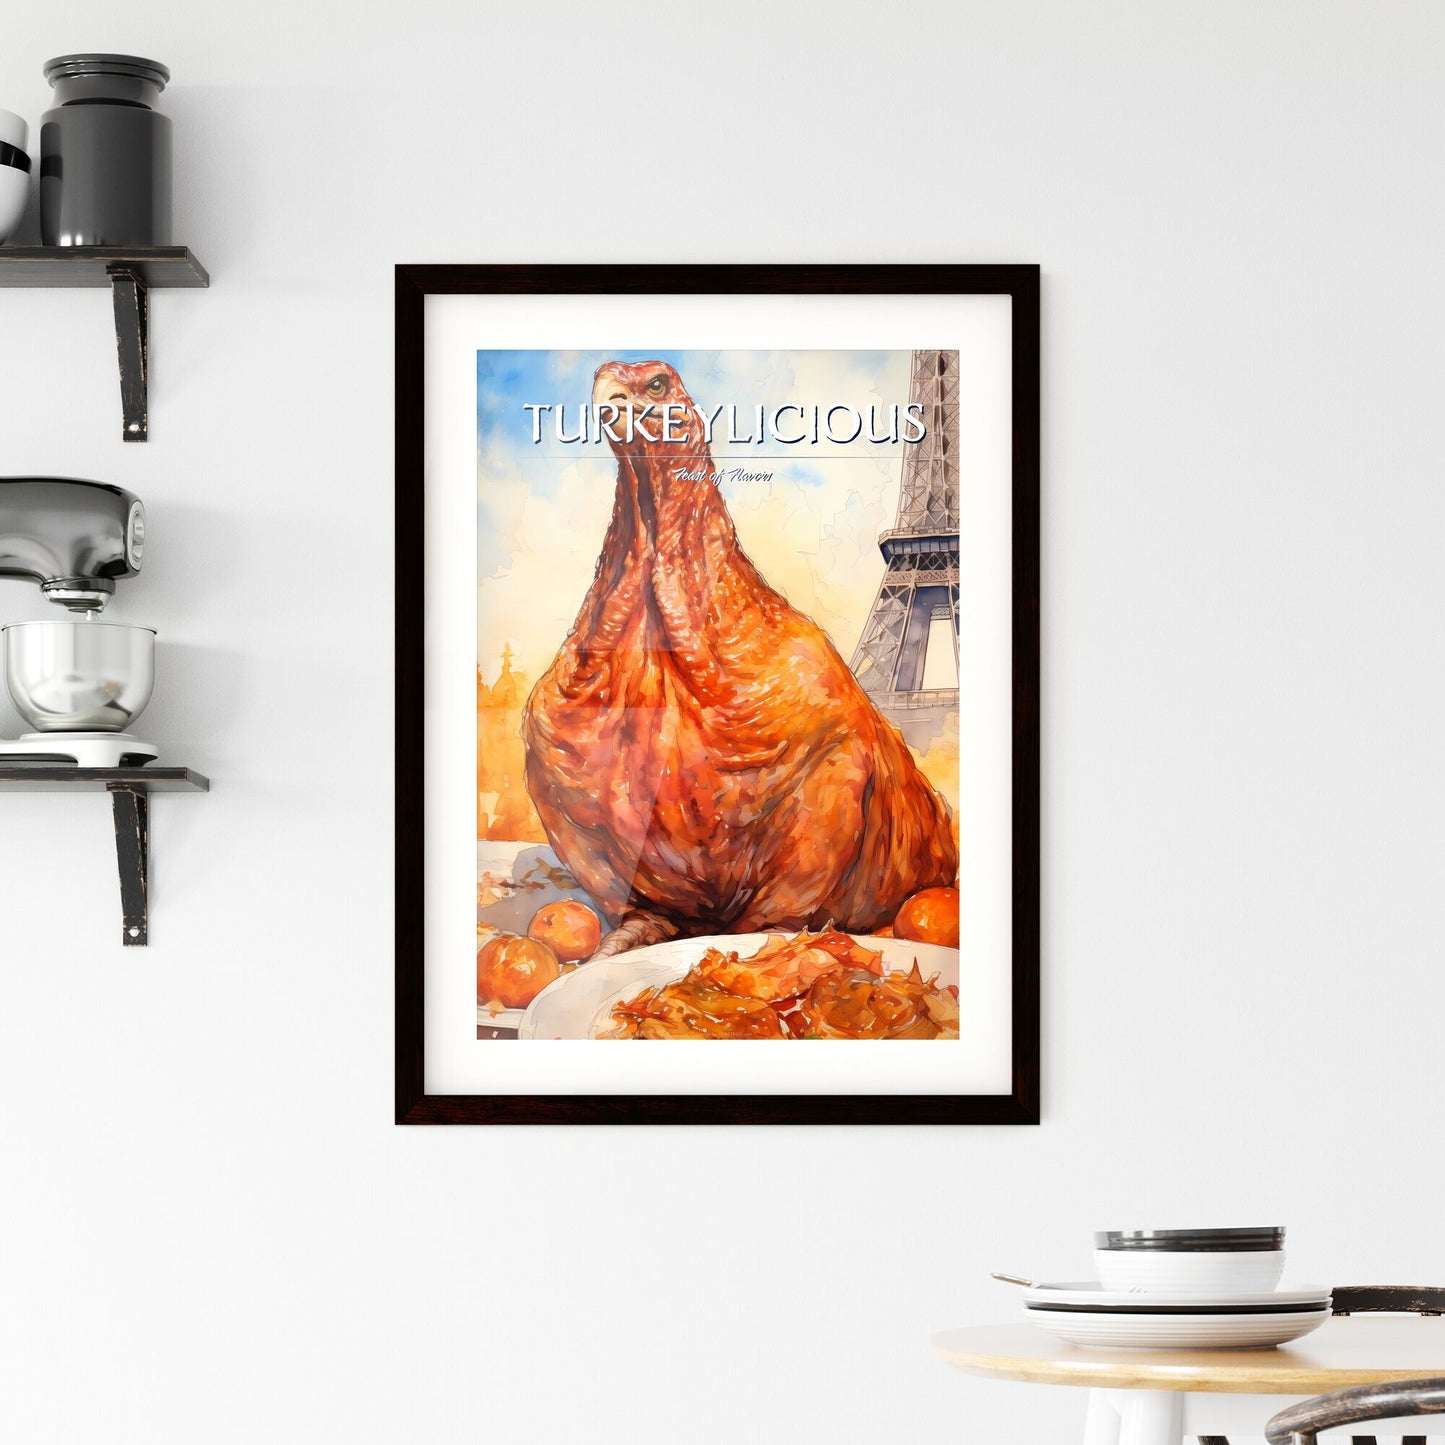 A Poster of Thanksgiving turkey - A Chicken With A Large Head And A Large Head With Oranges Default Title